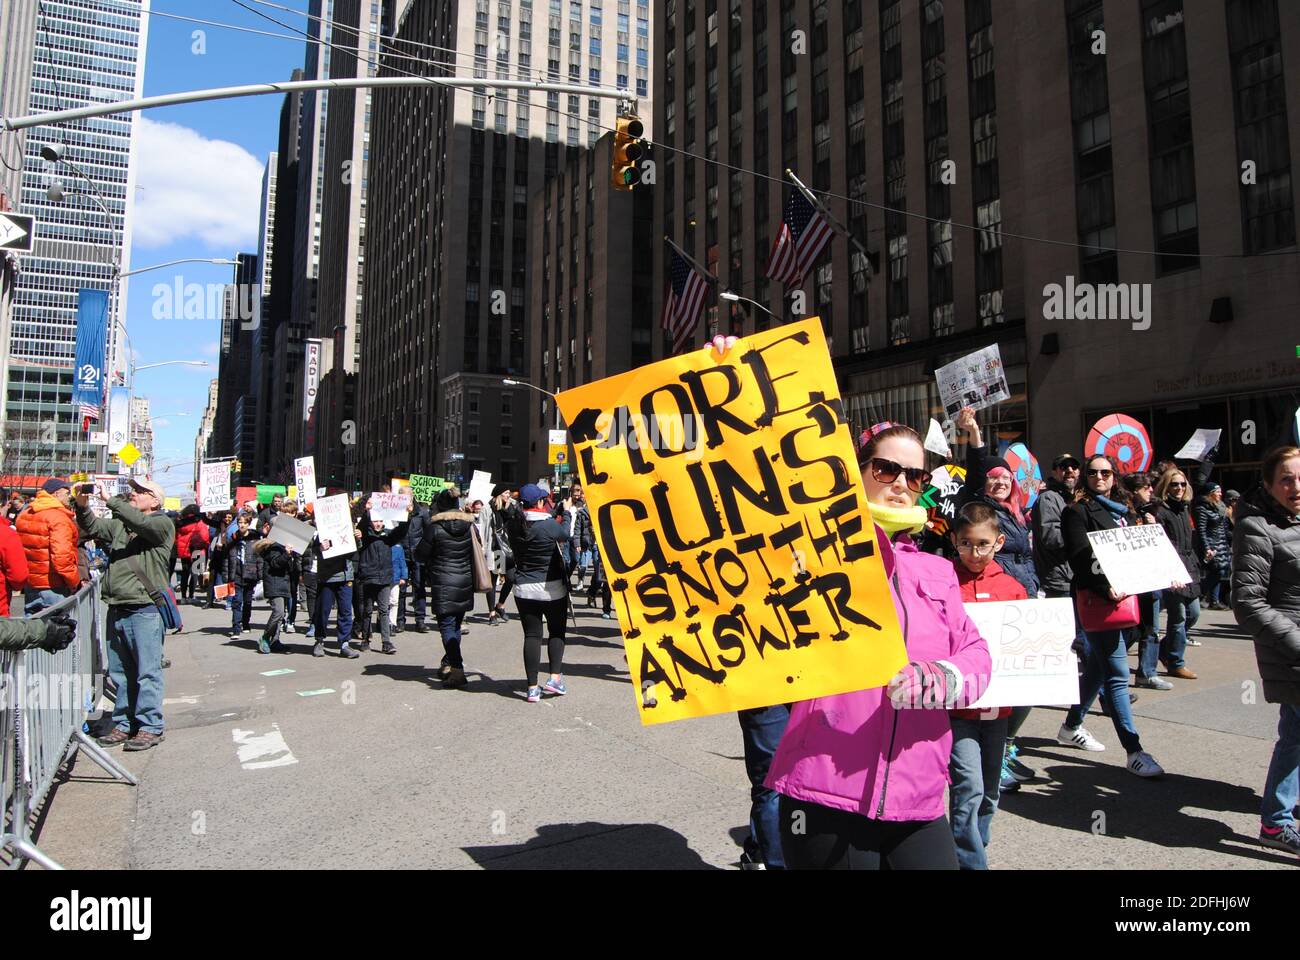 New York City, New York / USA - March 24 2018: A protester on 6th Avenue with a sign against guns during the March for Our Lives in New York City. Stock Photo